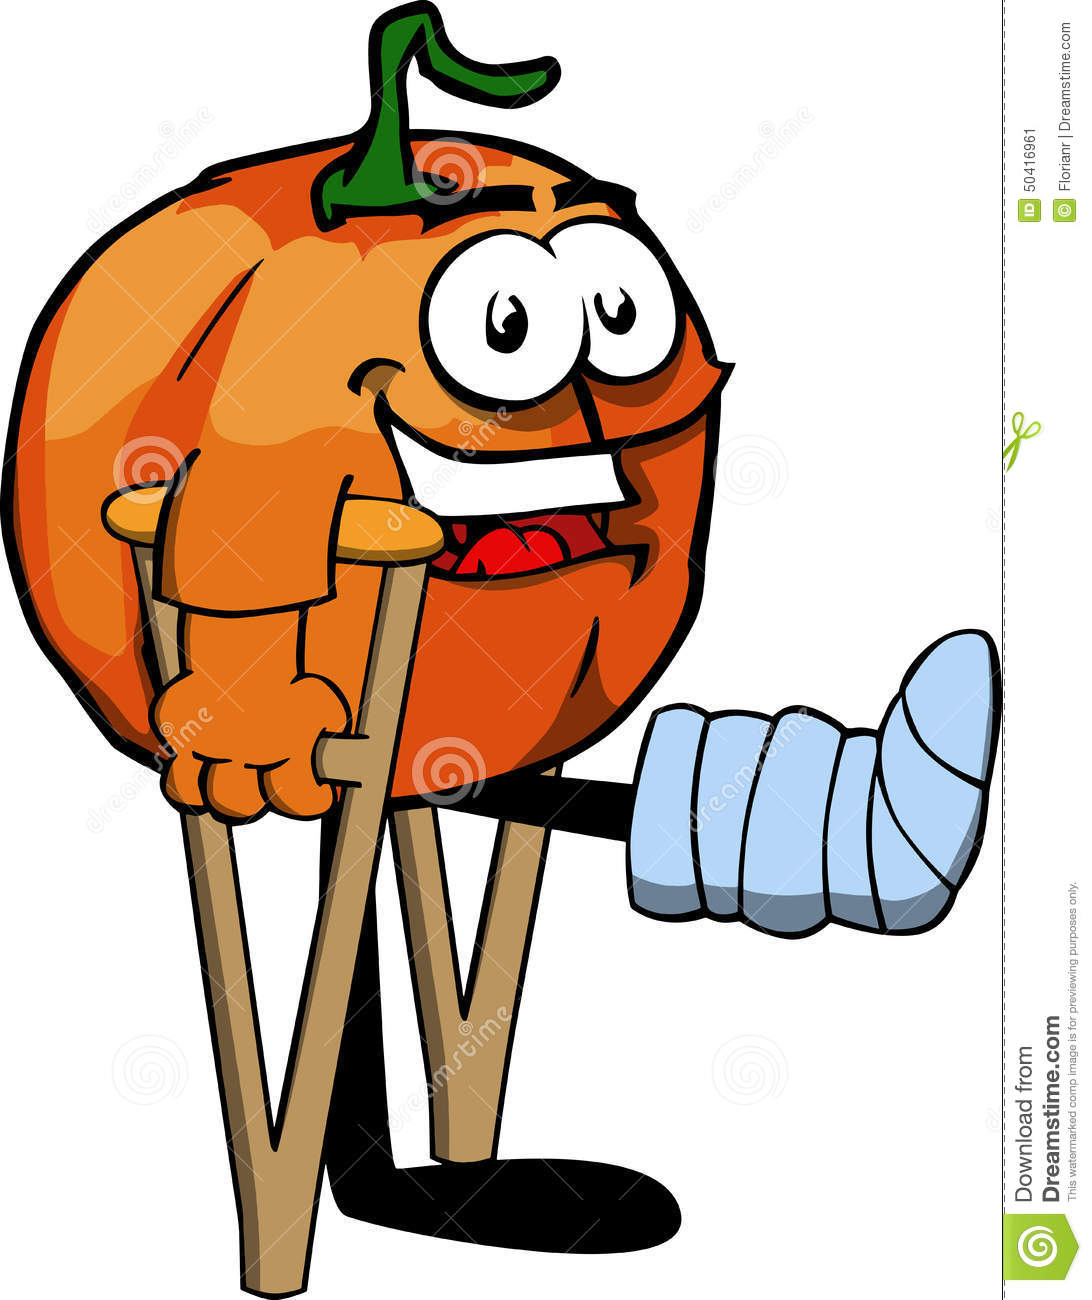 Stock Image  Pumpkin With A Broken Leg Walking On Crutches  Image